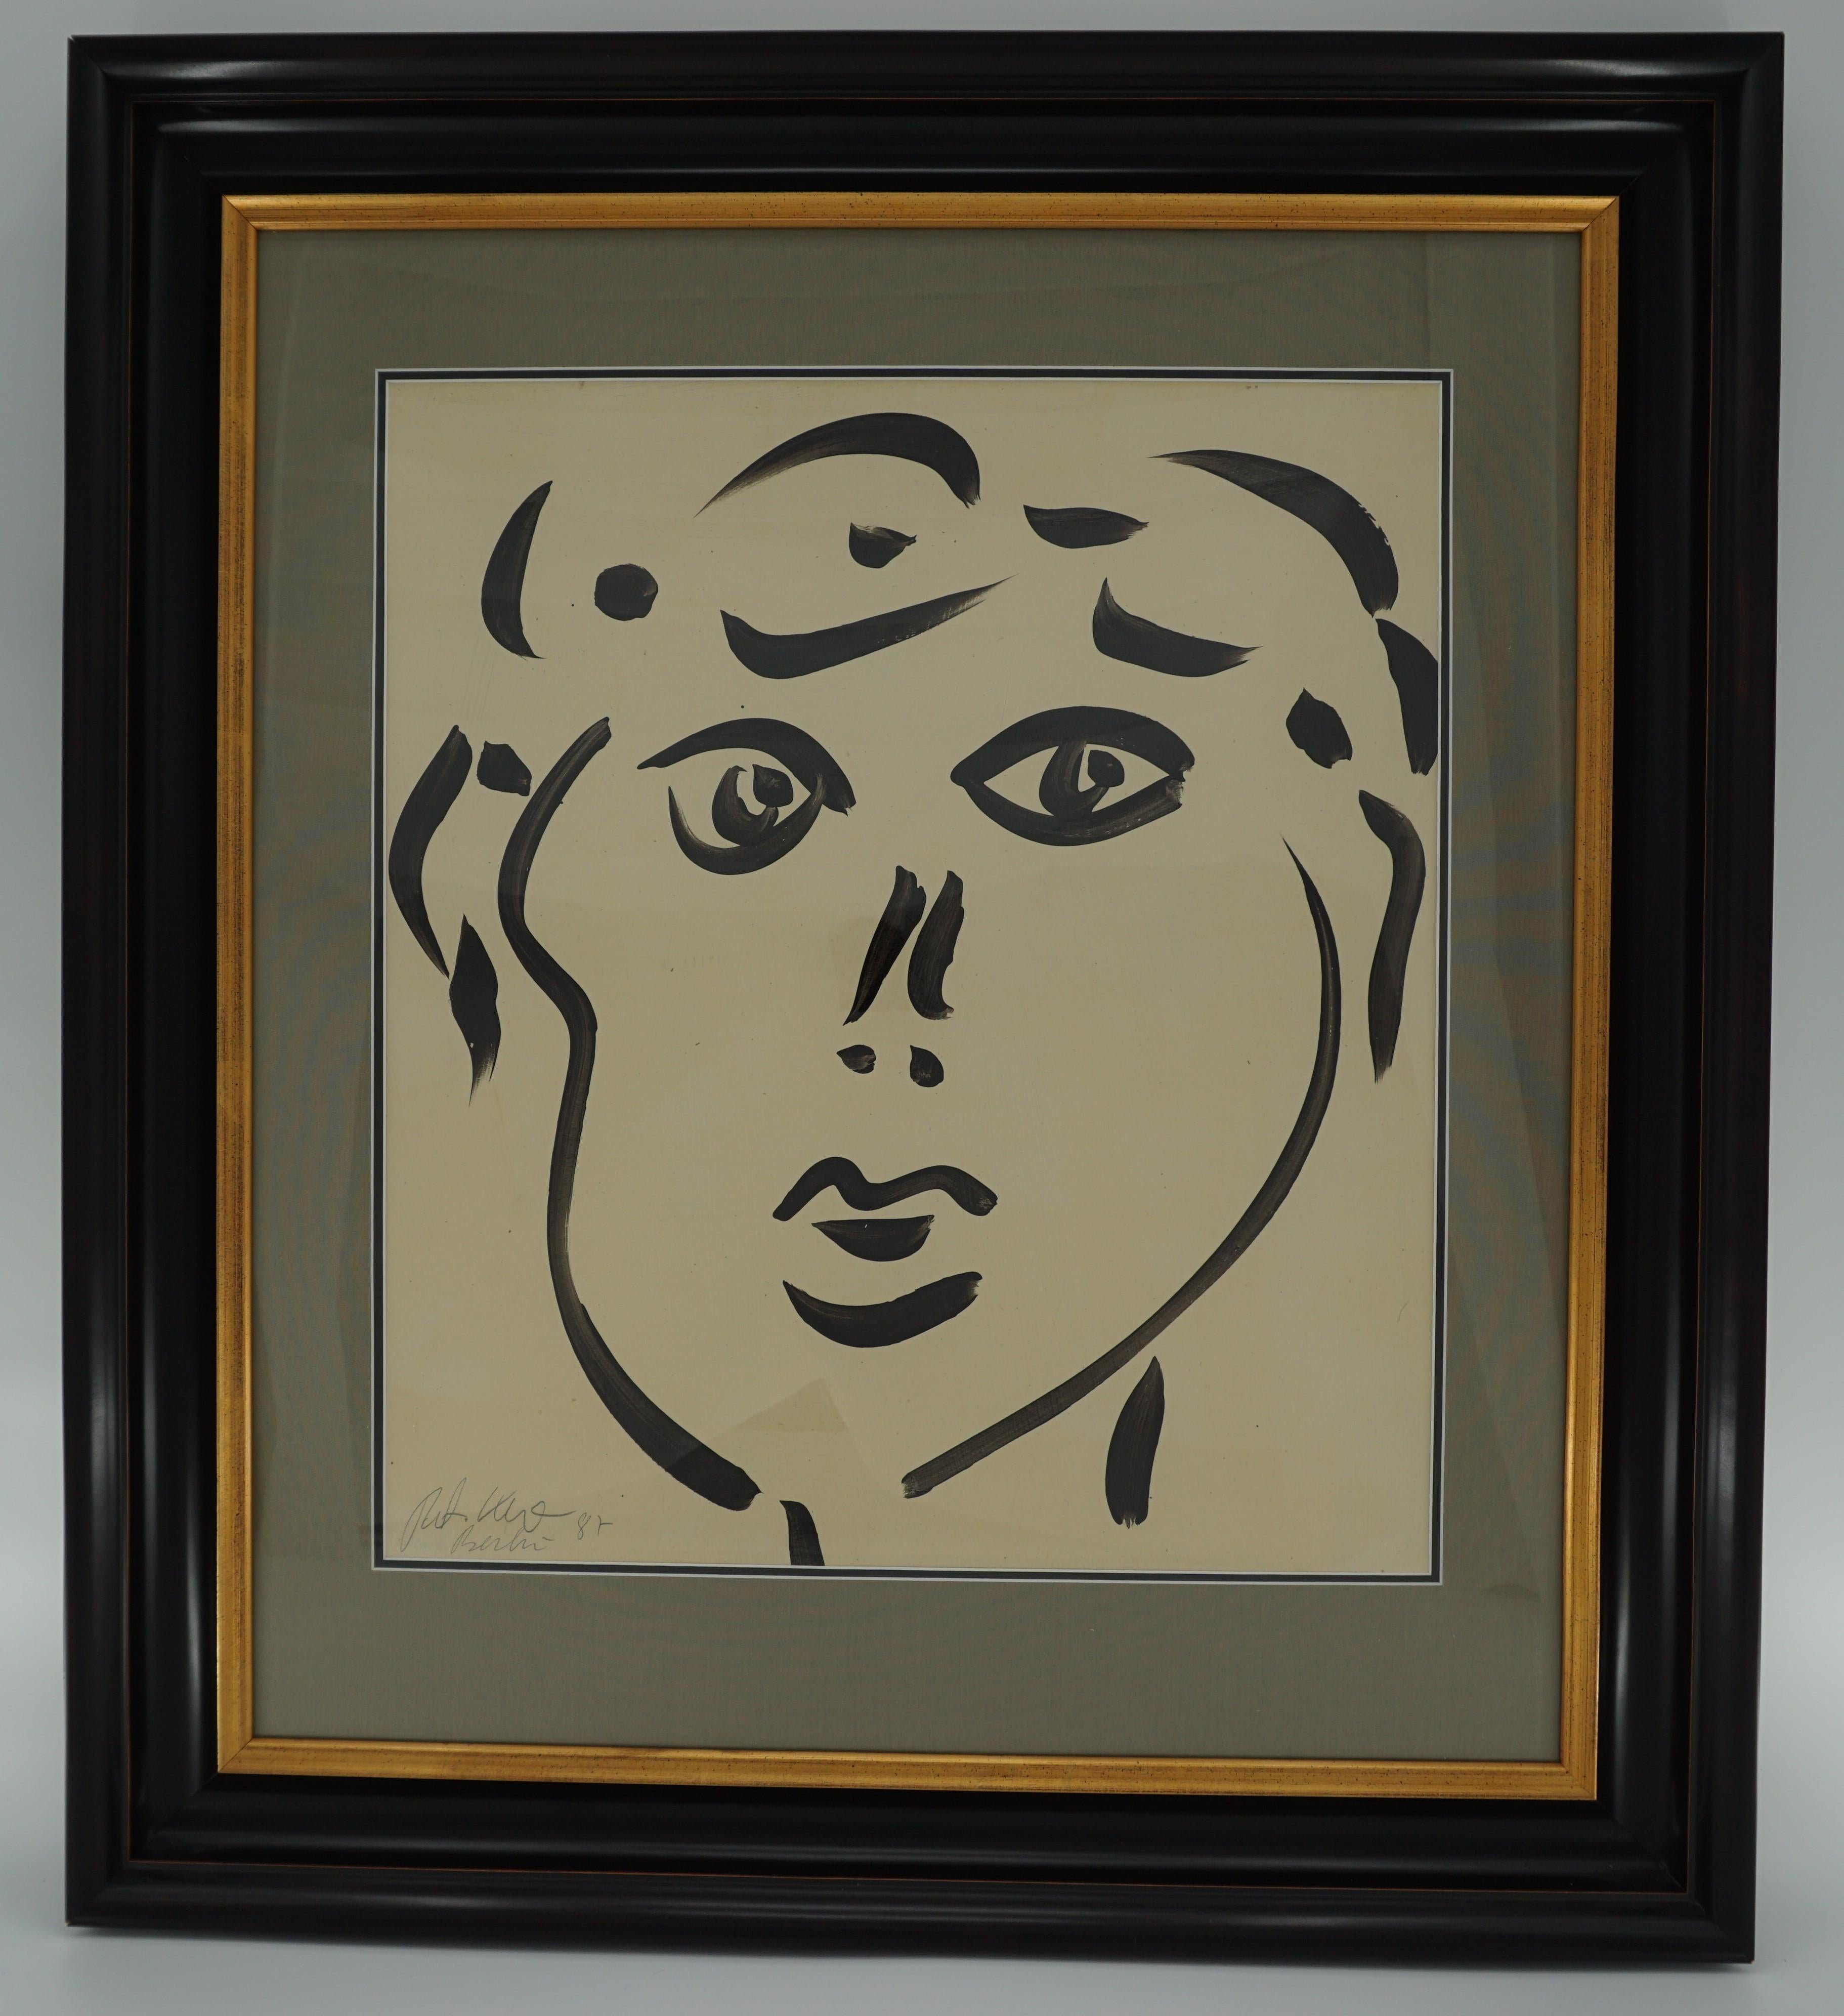 Painting by Peter Keil, circa 1987. Acrylic on Paper, matted and framed with a black and gold wood frame. The art work is called 